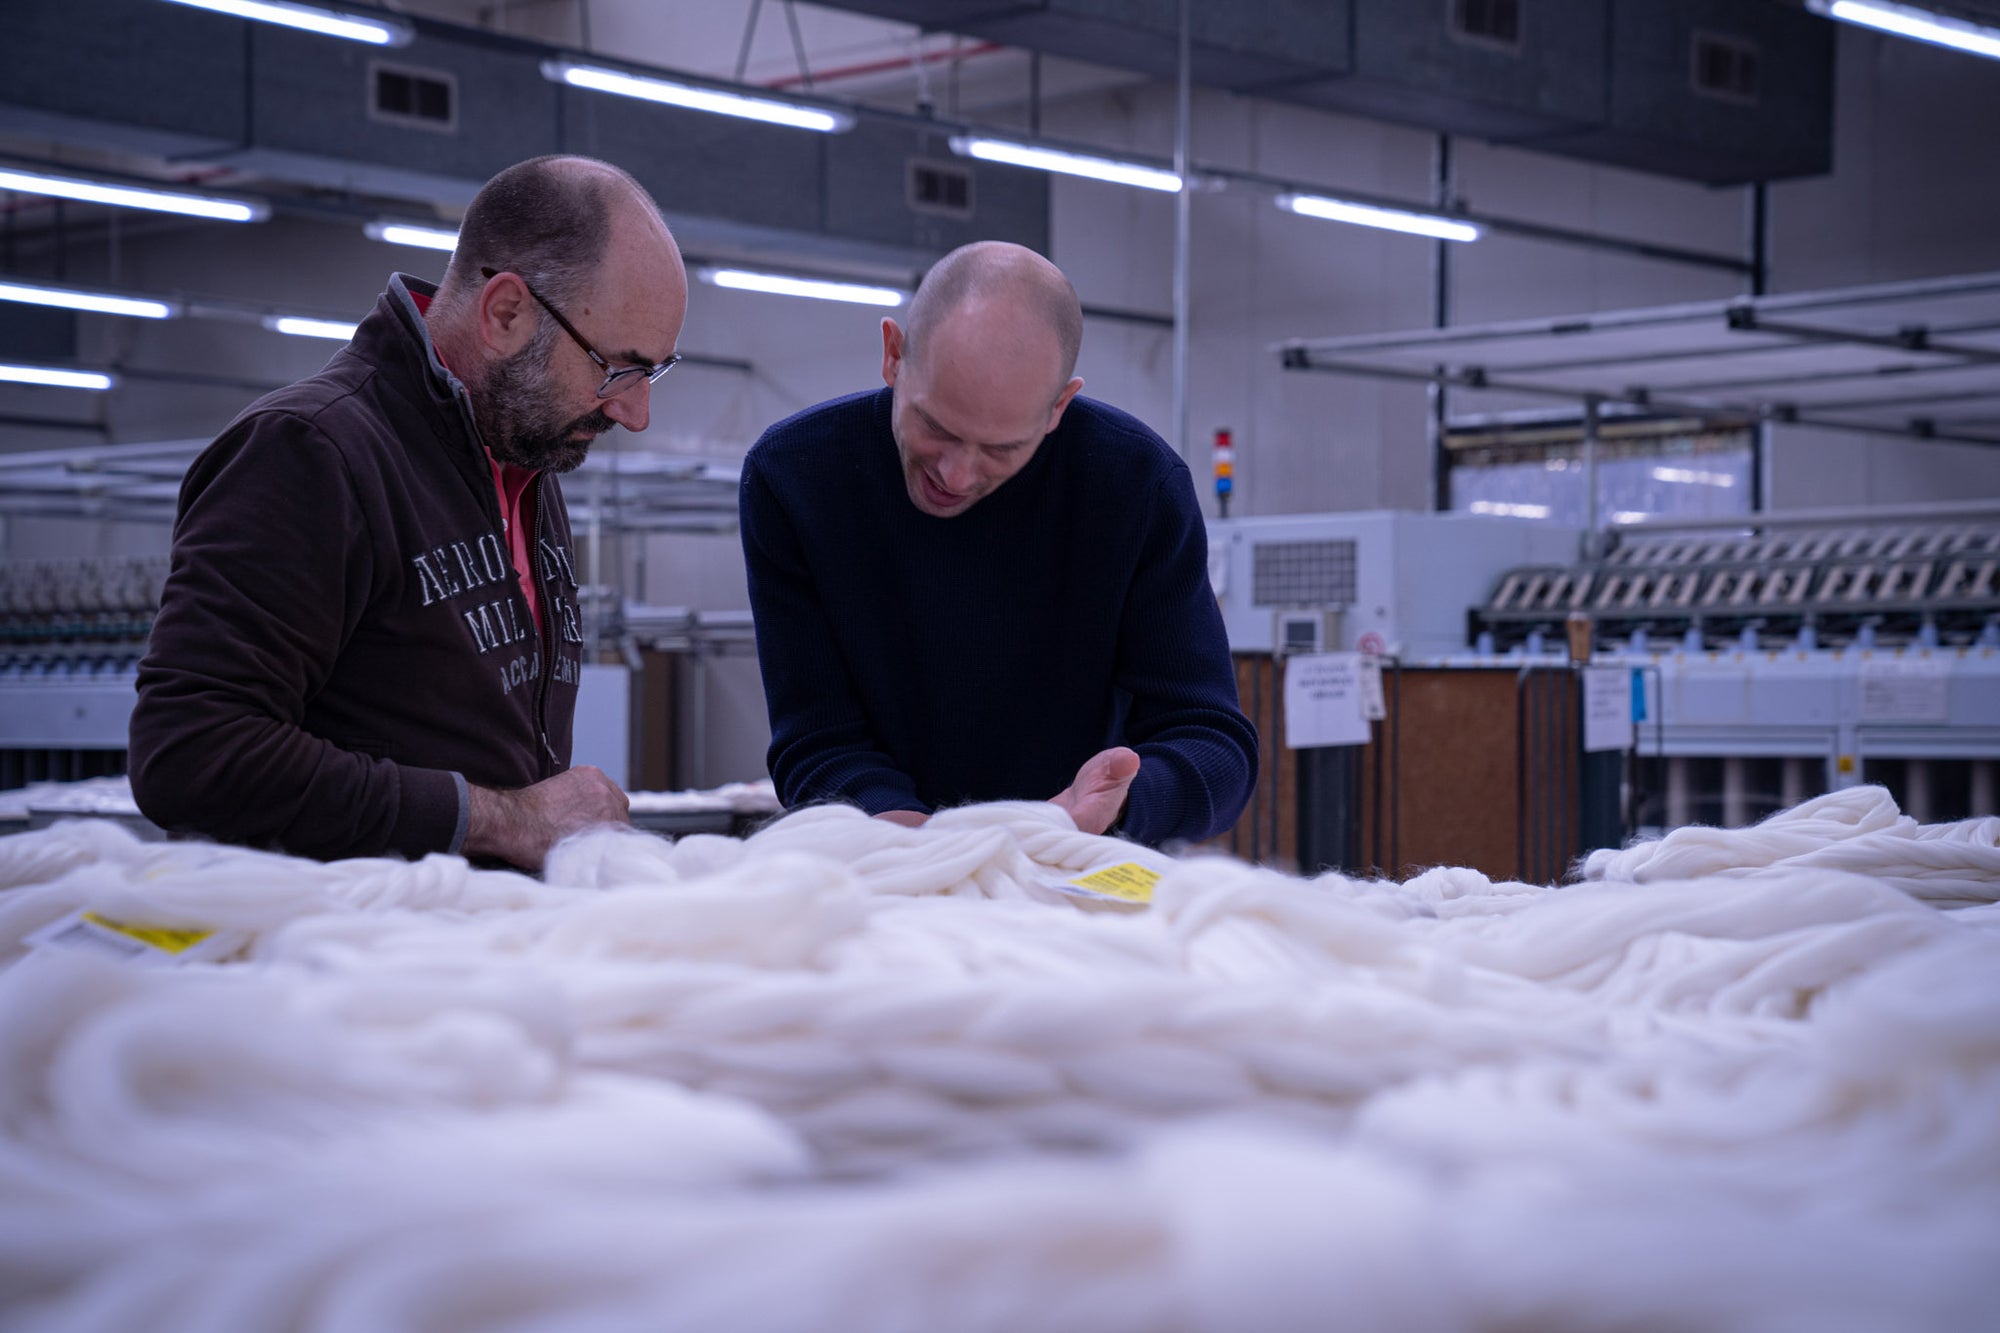 Inspection of combed Merino wool tops at spinning facility in Tarcento